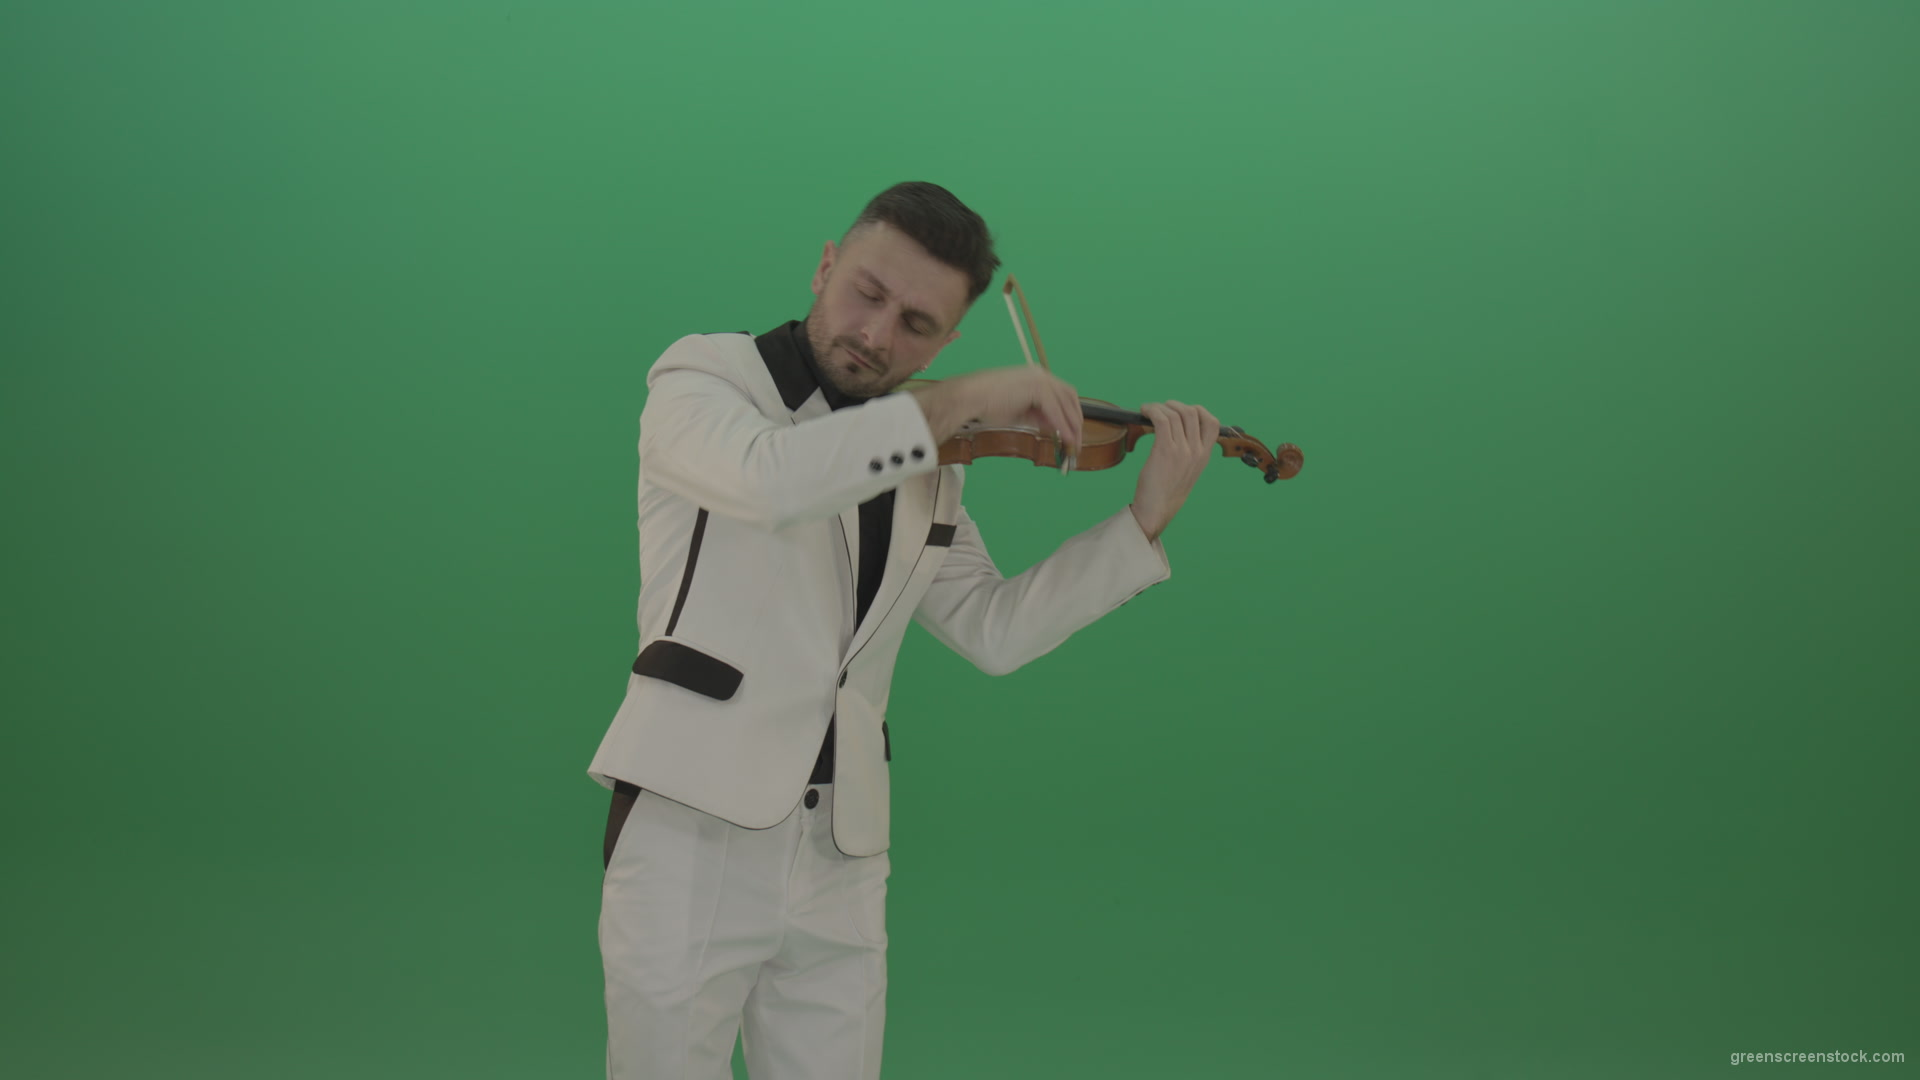 Man-is-playing-slow-love-in-white-costume-on-violin-Fiddle-string-music-instrument-isolated-on-green-screen_004 Green Screen Stock